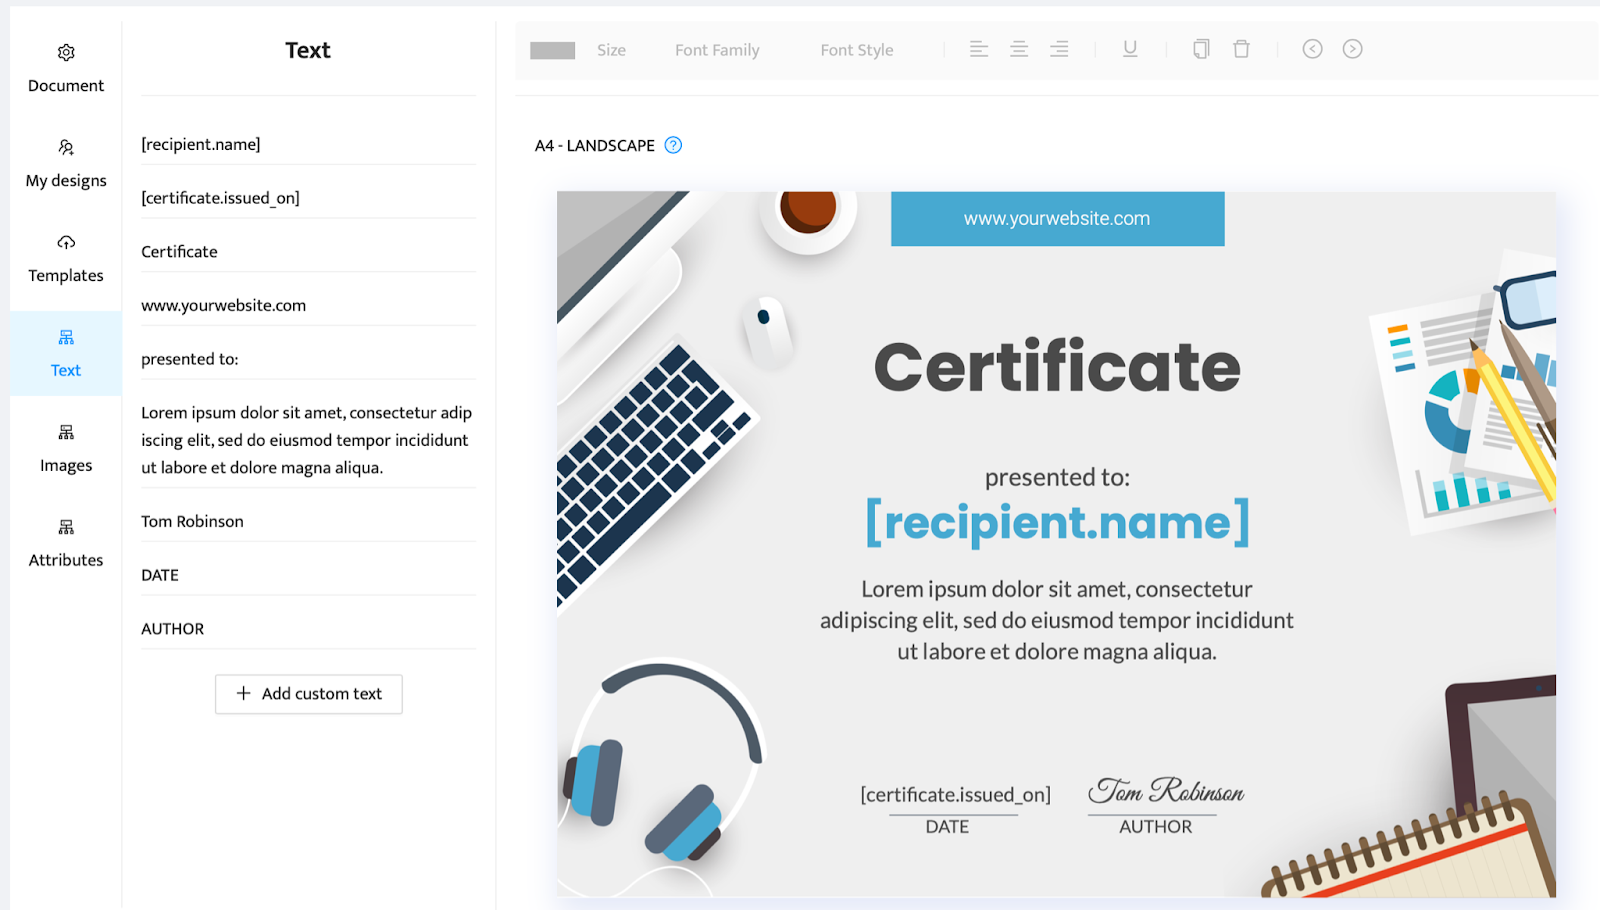 Certificate with custom text 